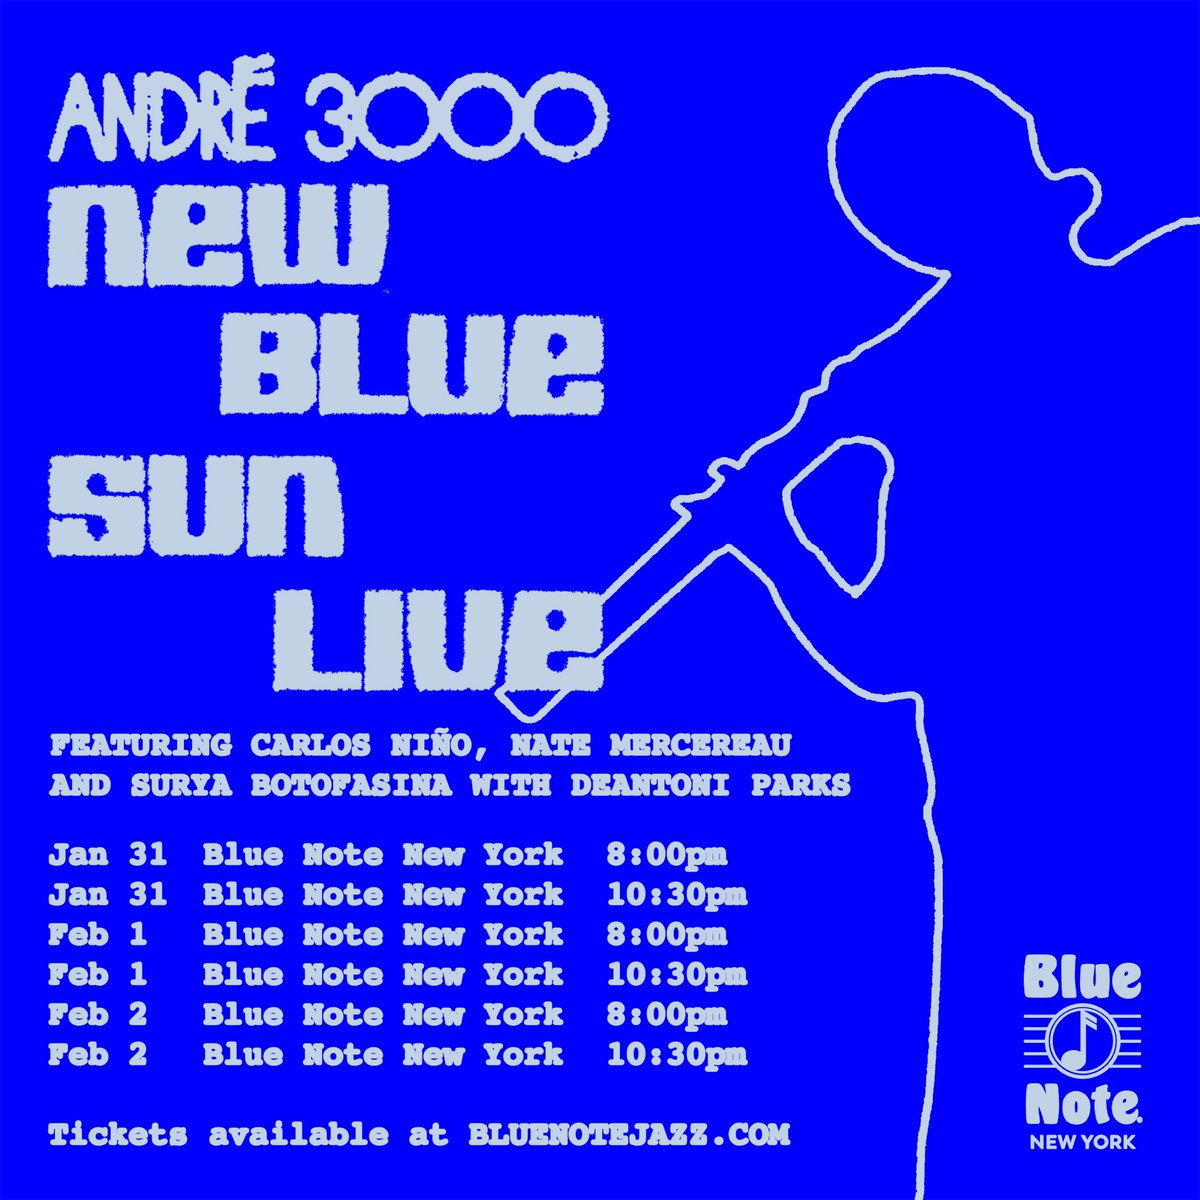 We are honored to announce:⁠ ⁠Andre’ 3000⁠ New Blue Sun Live⁠ will grace the Blue Note stage for three nights Jan 31 - Feb 2! The legendary Andre 3000 will be performing songs from his critically acclaimed new album, “New Blue Sun.”⁠ Tickets on sale Wed, 1/25 at 10am EST